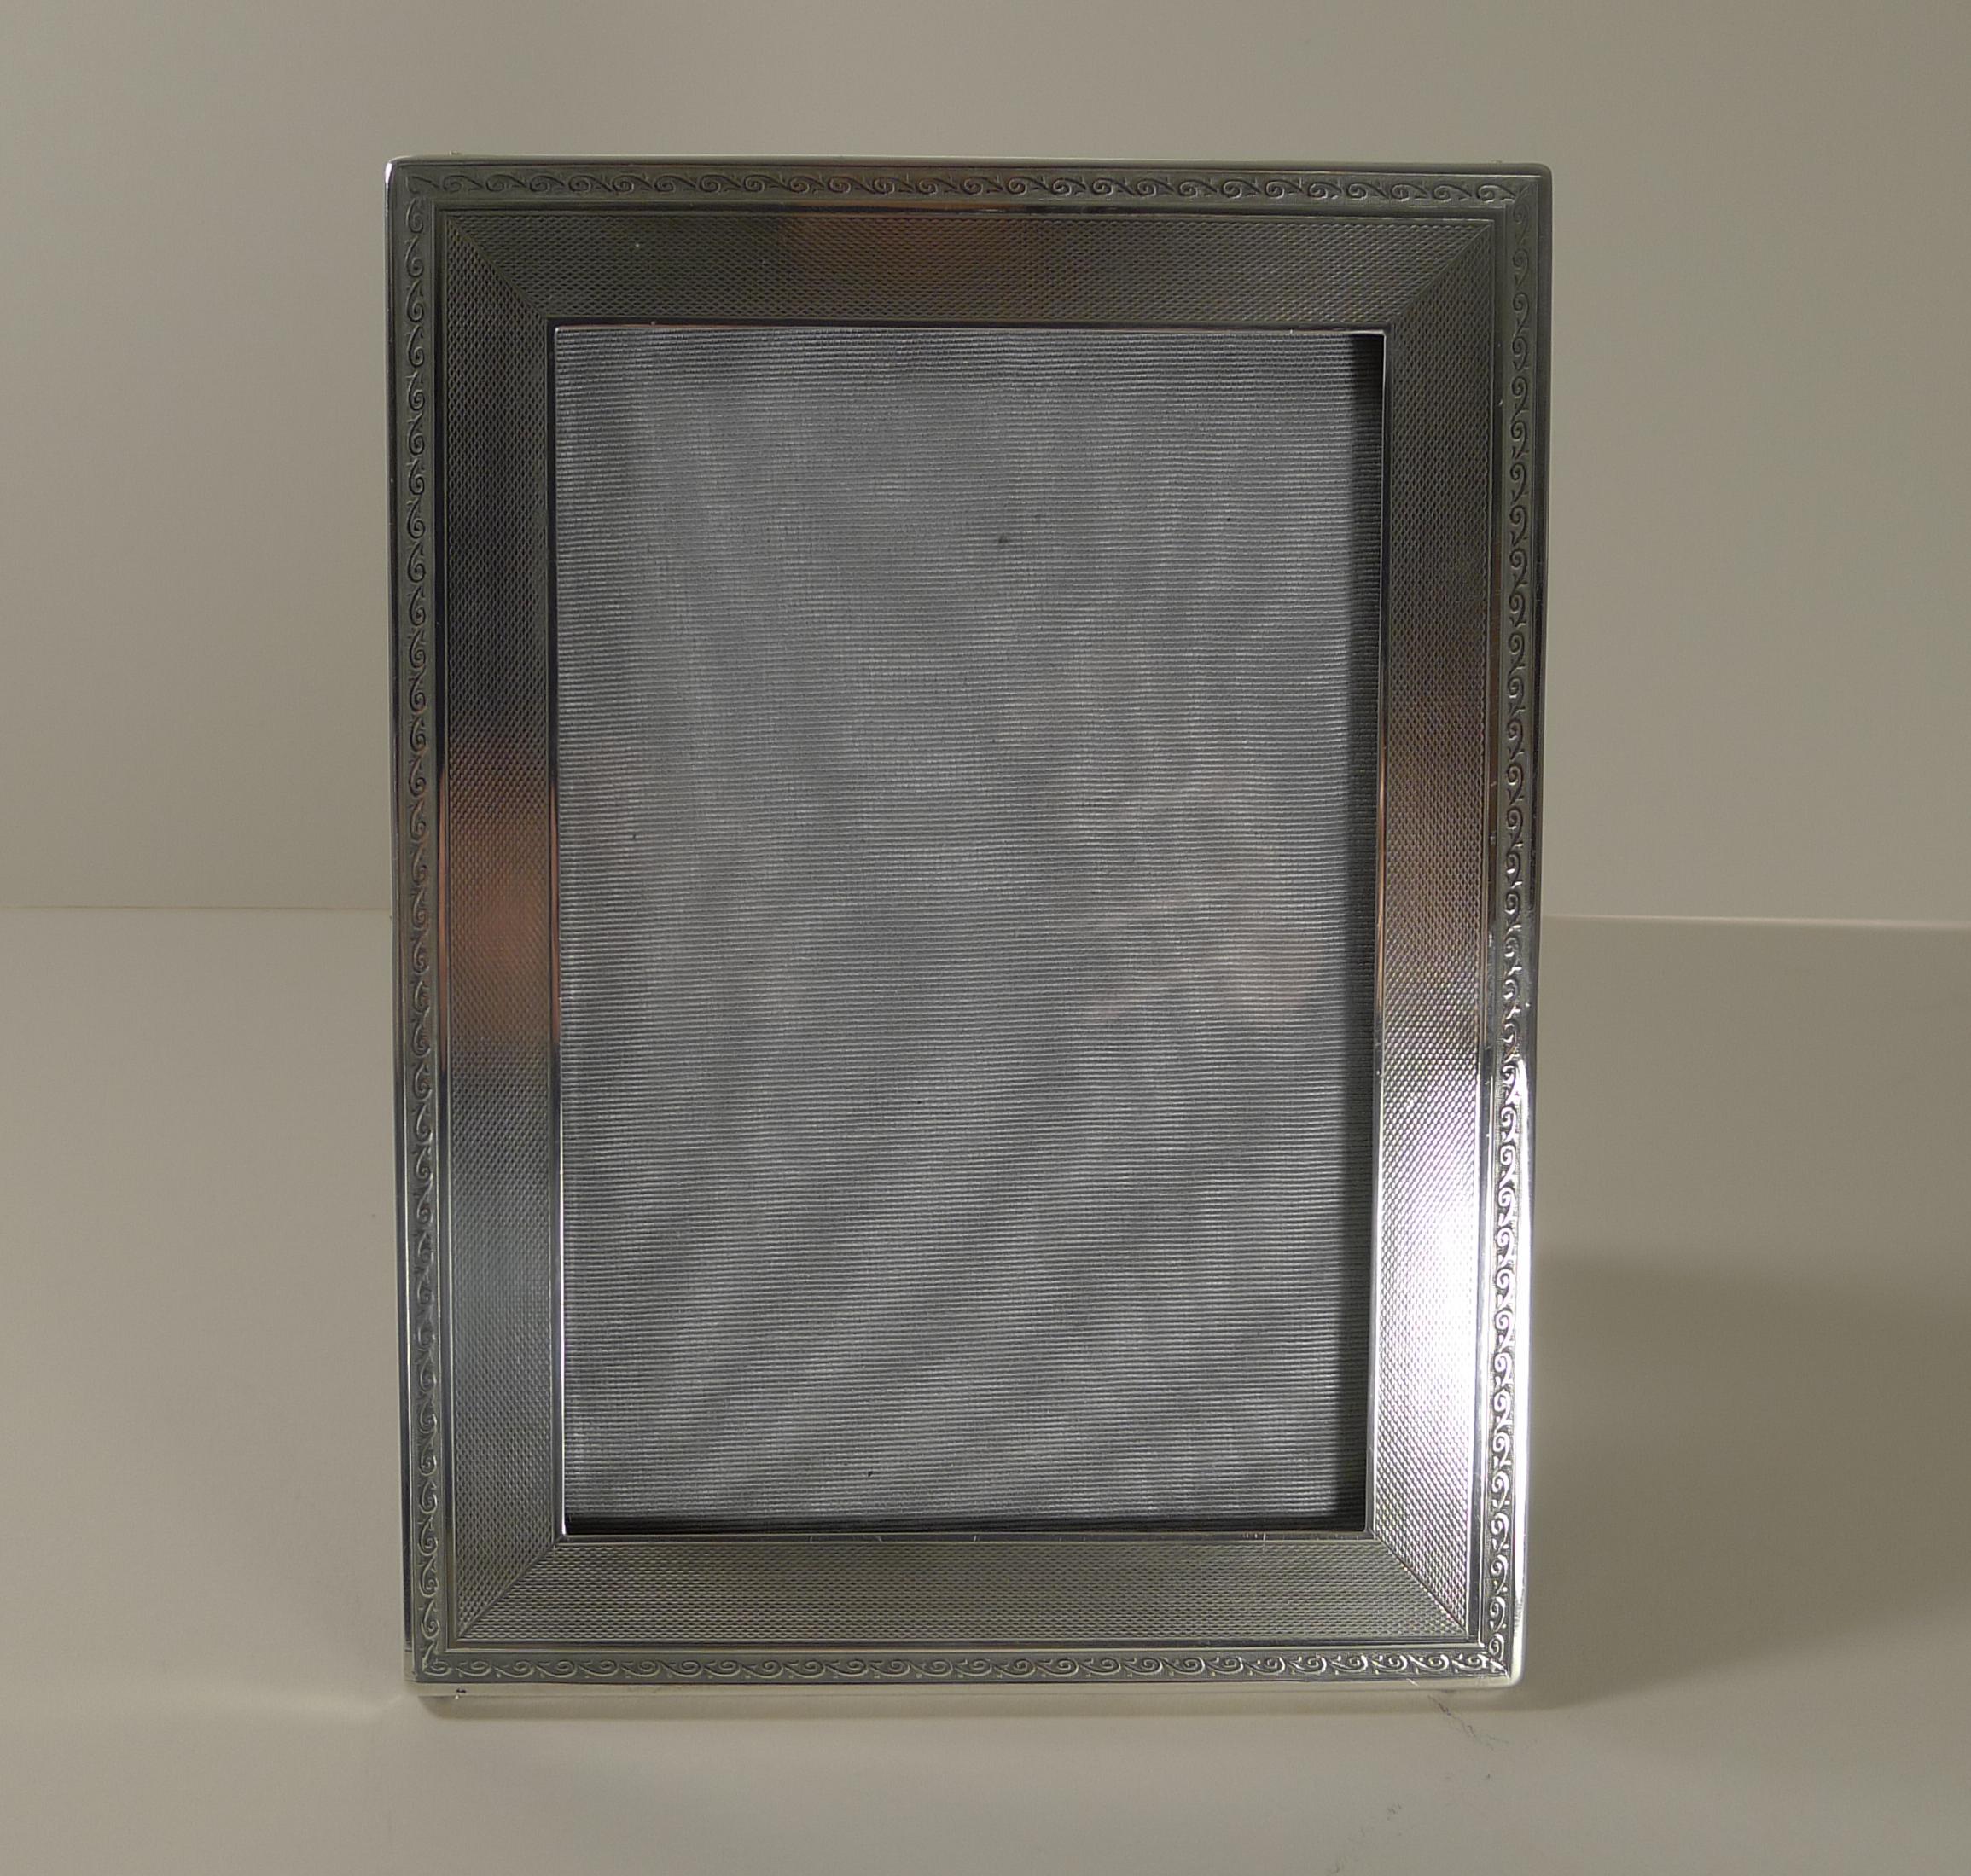 A fabulous Art Deco photograph frame, exactly 100 years old, making it a true antique example. The silver is beautifully decorated with an engine turned panel with a decorative border.

The backing is made from solid wood with a folding easel